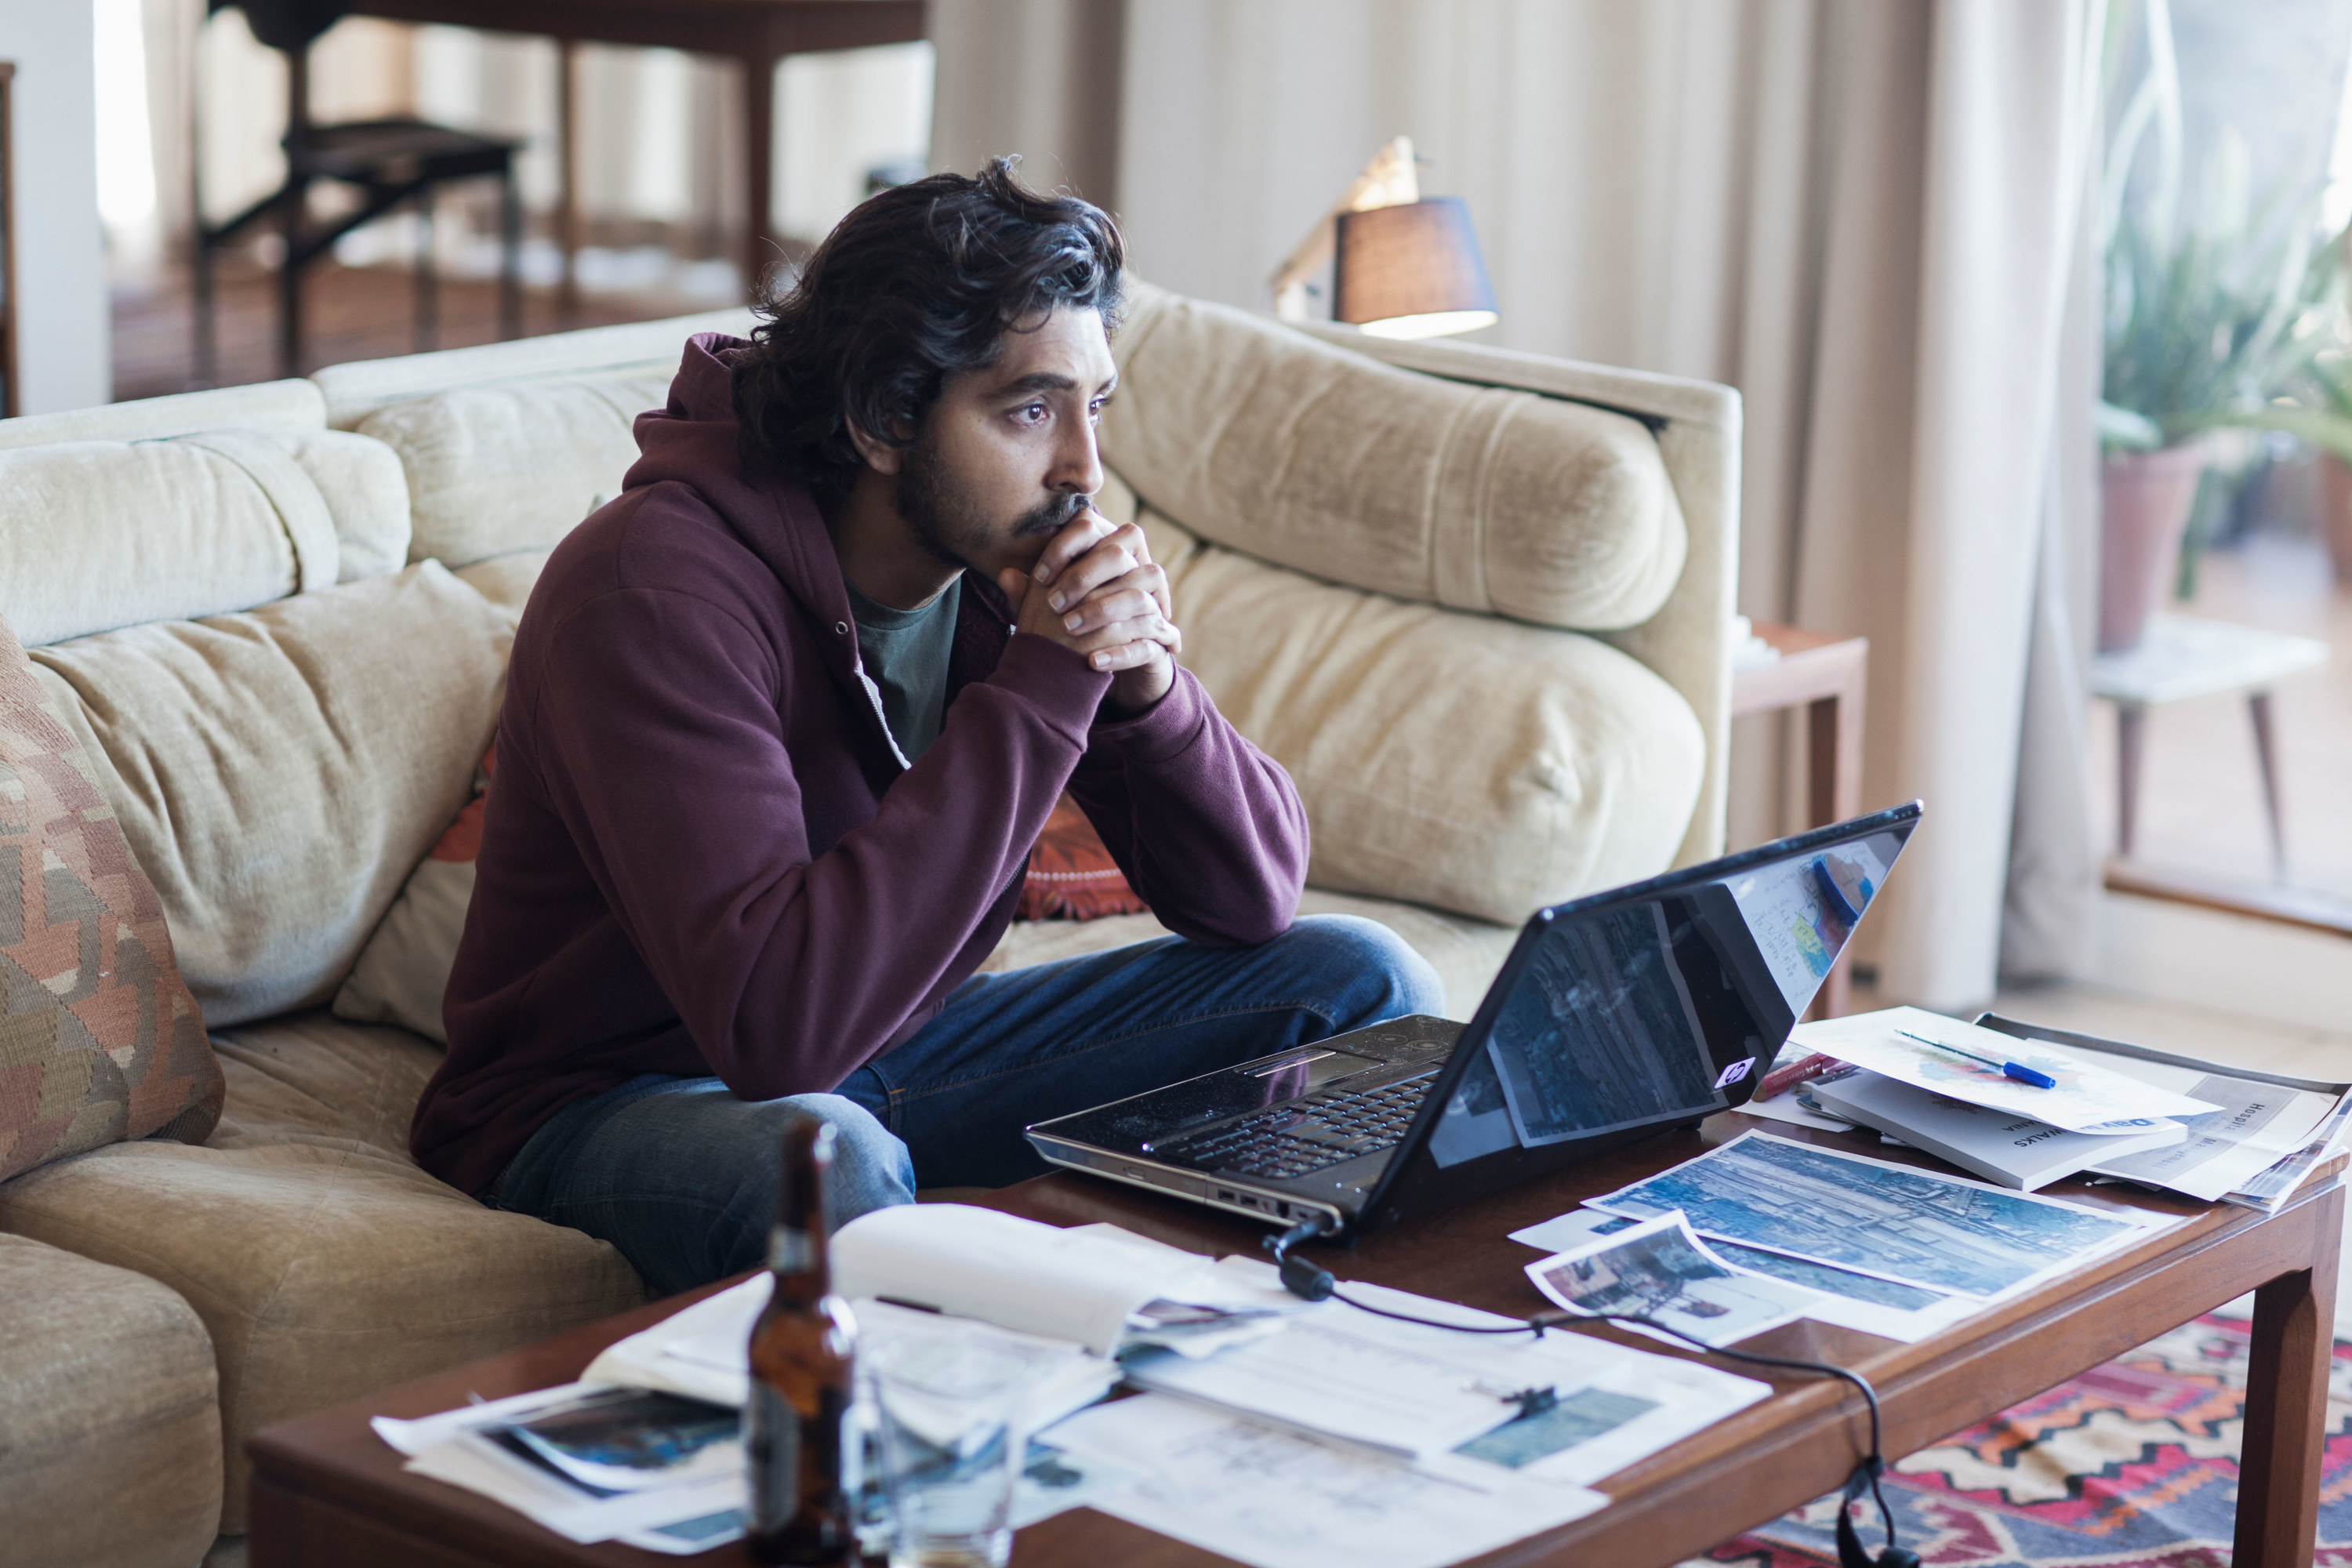 Saroo (played by Patel) doing research at his coffee table